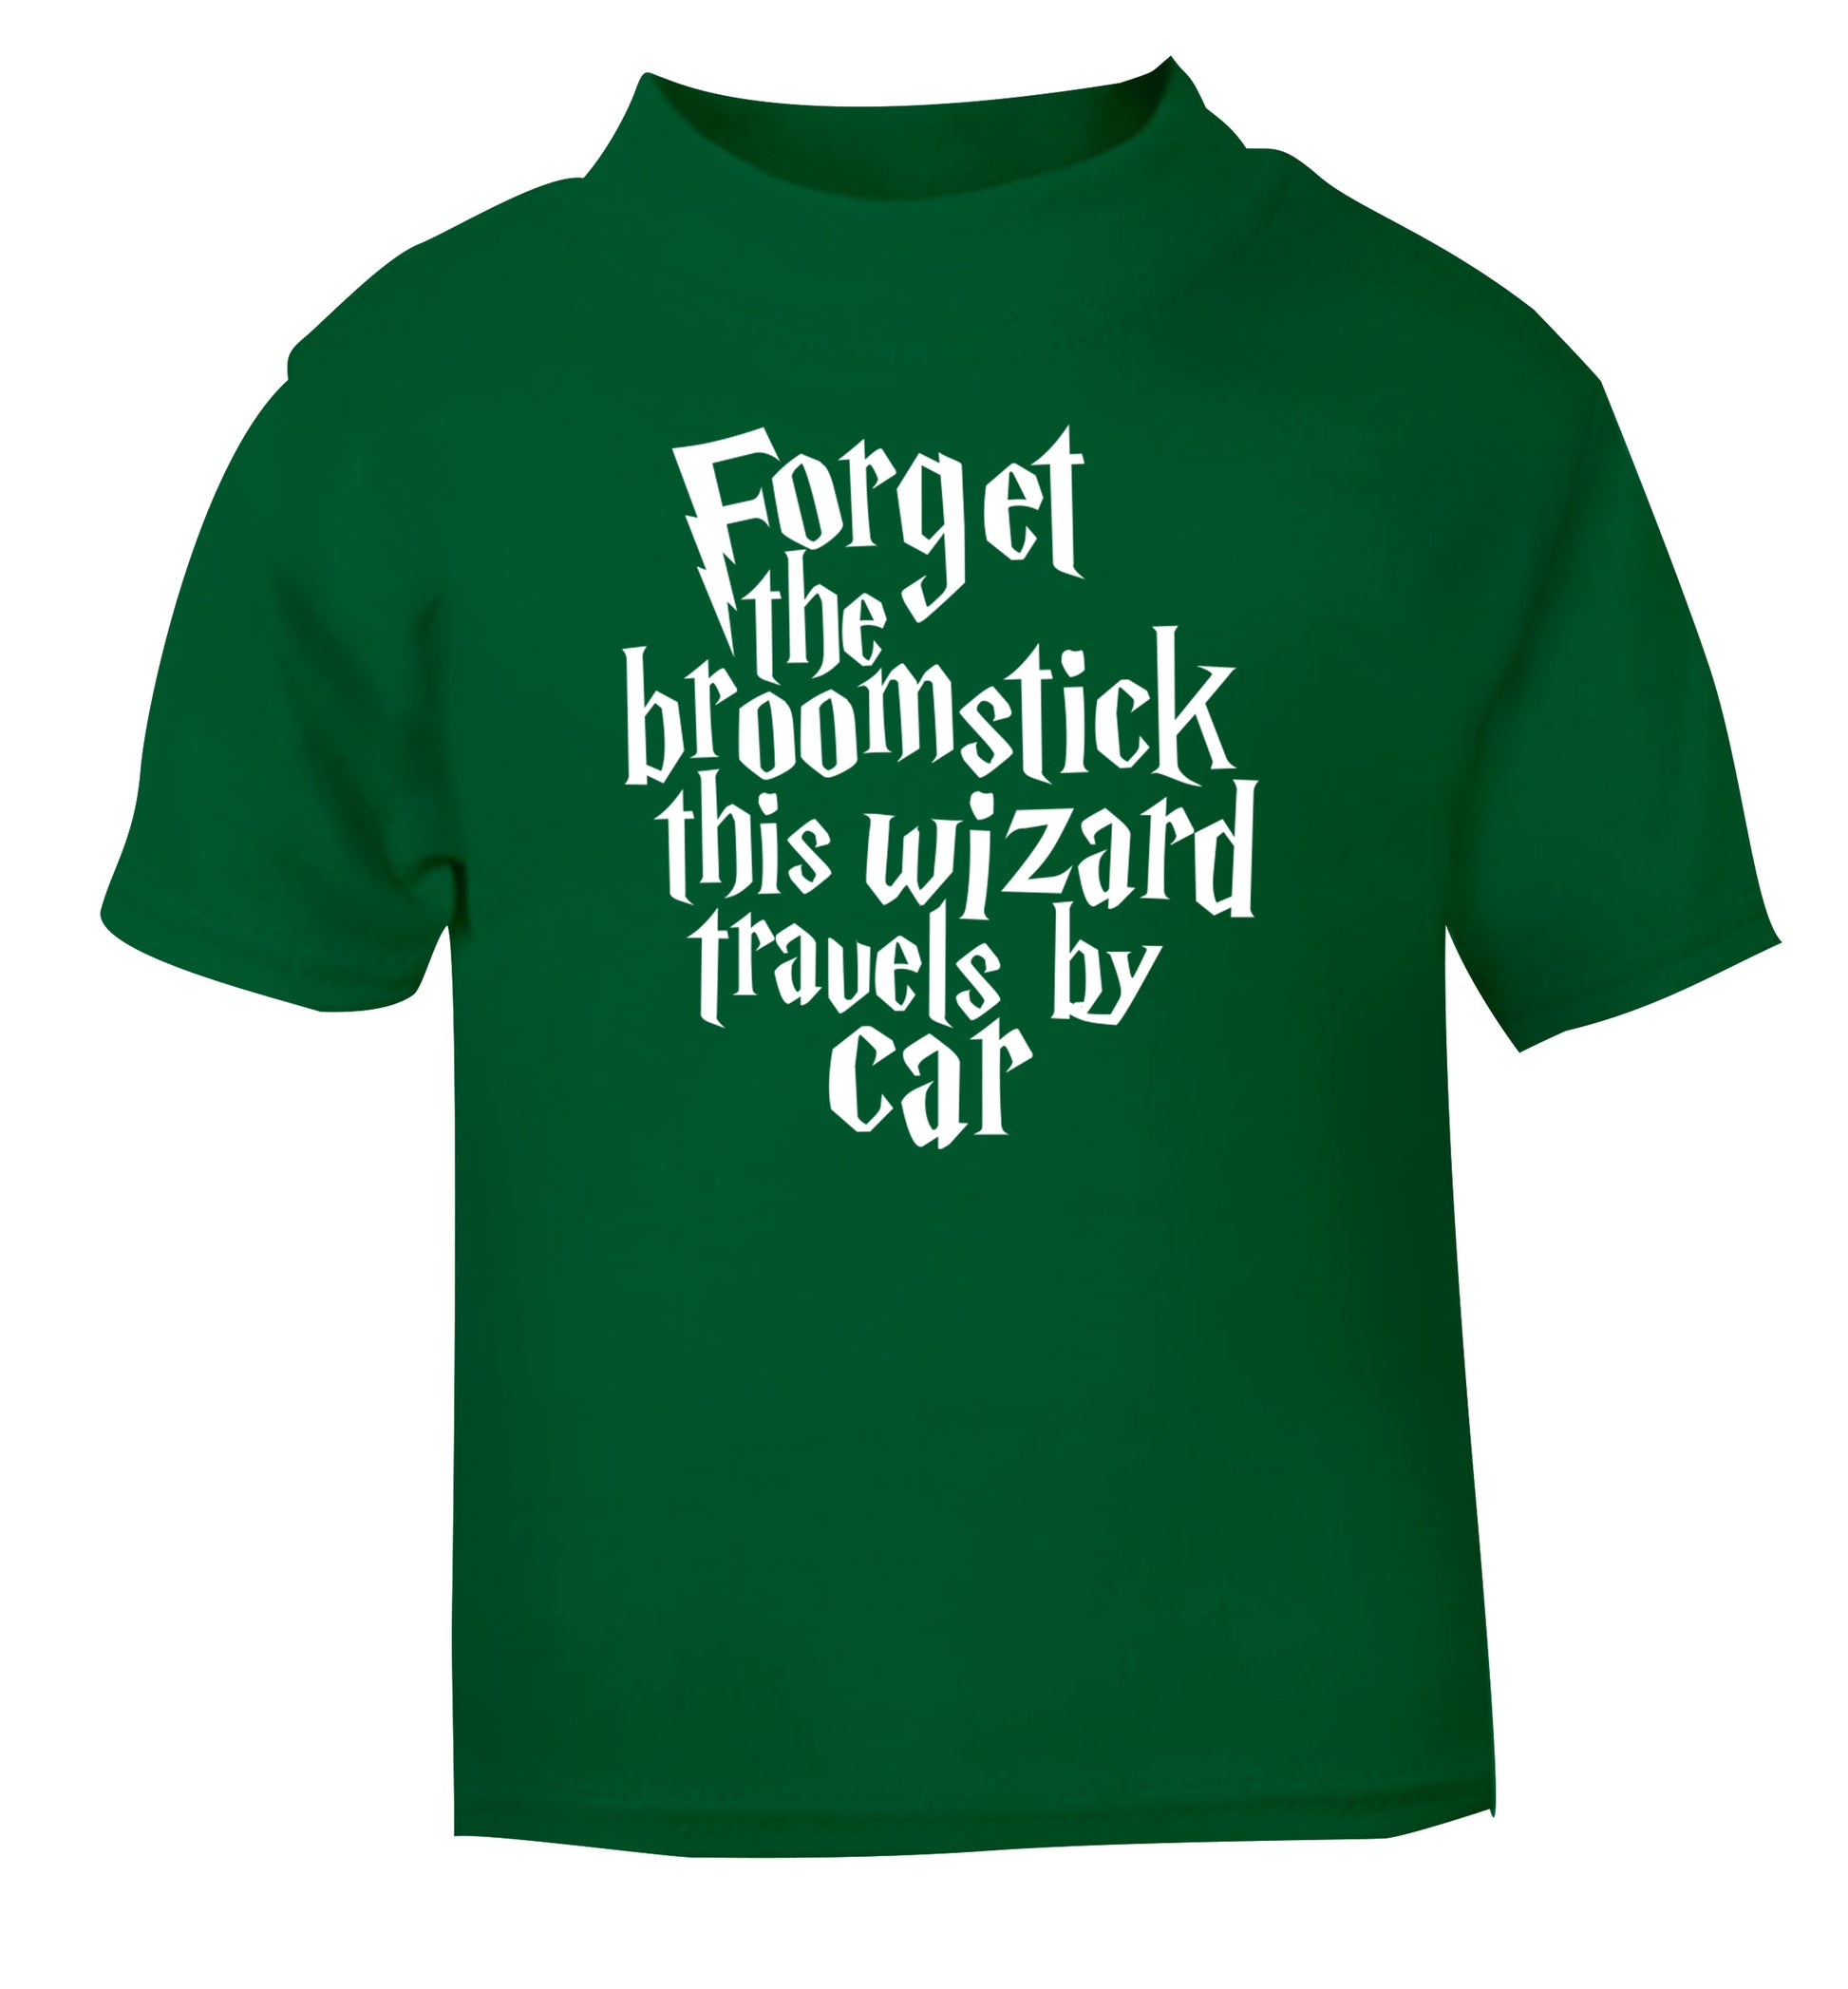 Forget the broomstick this wizard travels by car green Baby Toddler Tshirt 2 Years